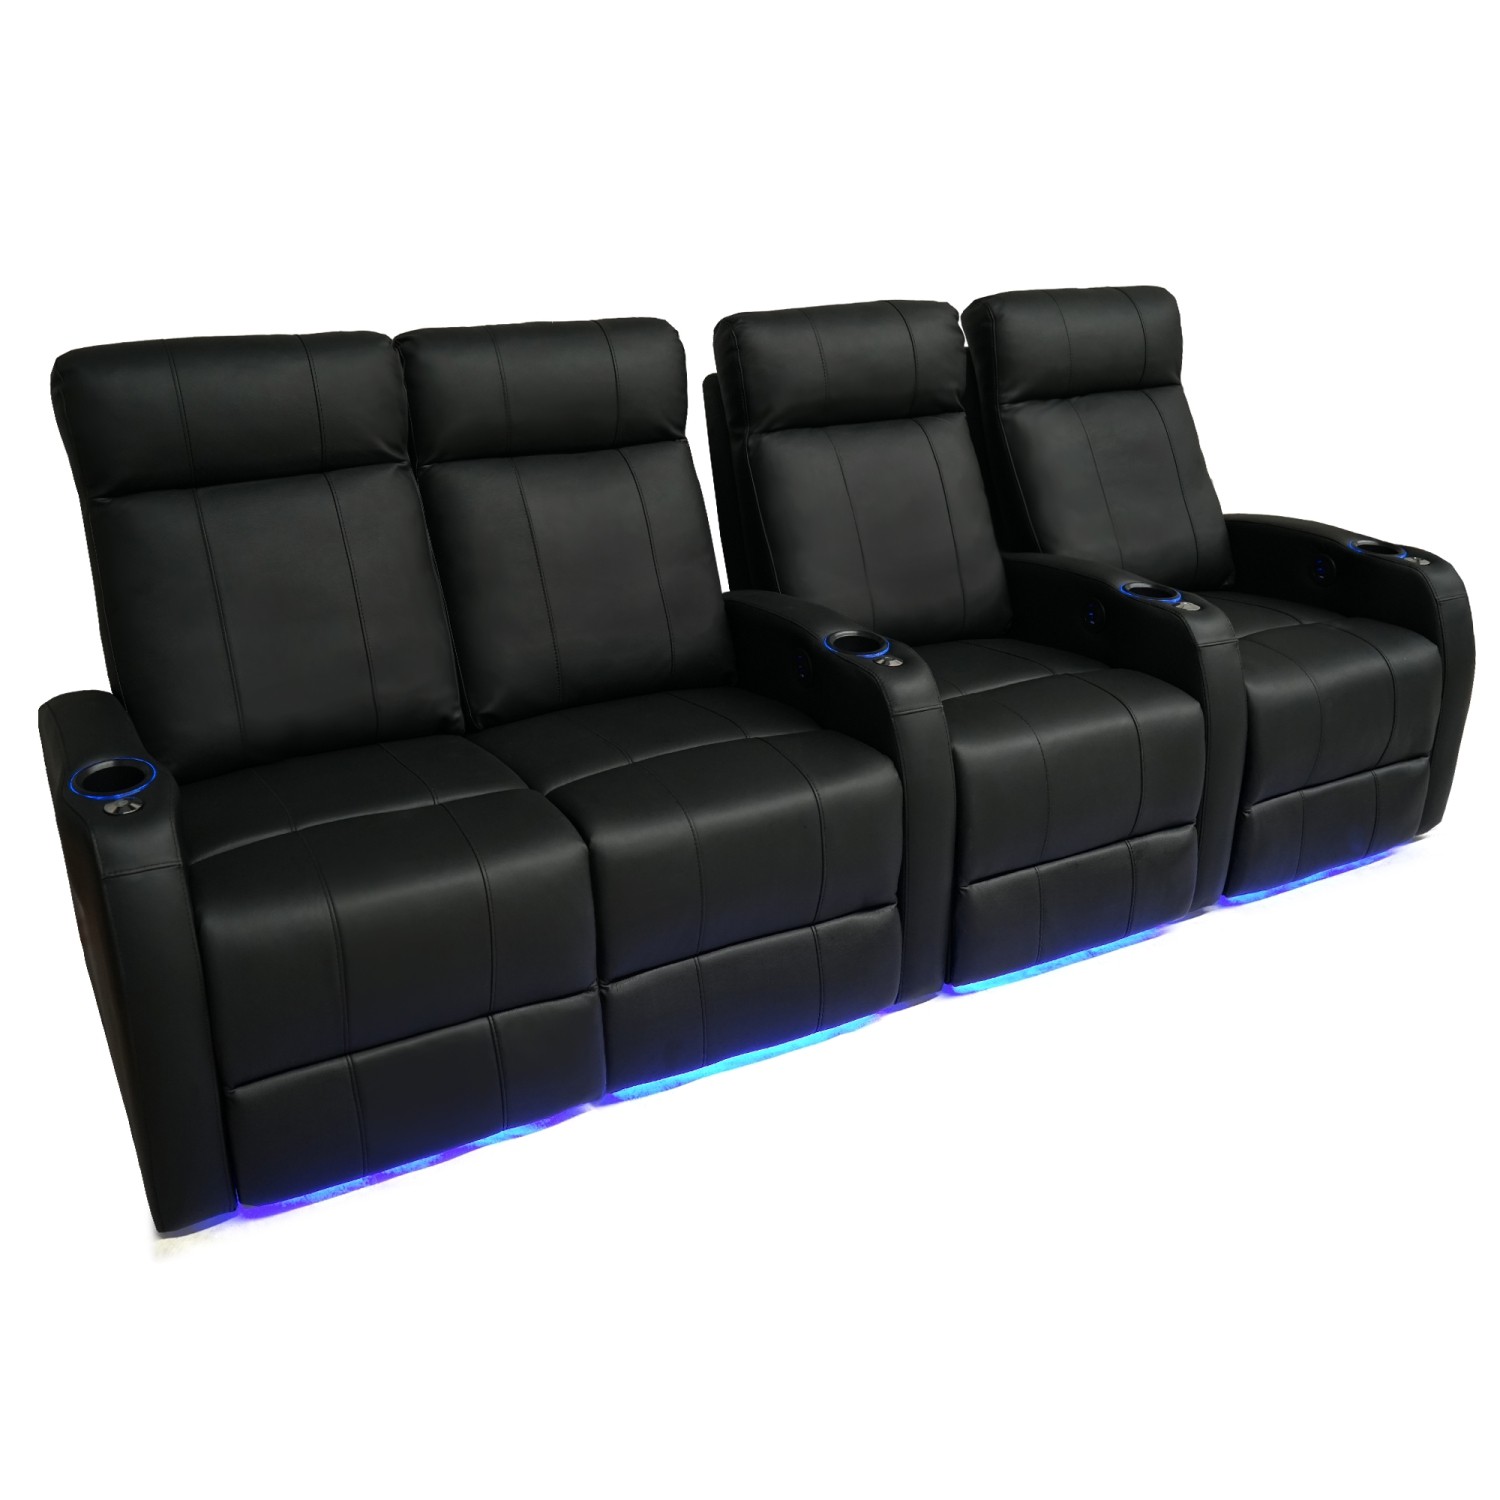 Valencia Syracuse Motorized Home Theater Seating - Top Grain Leather